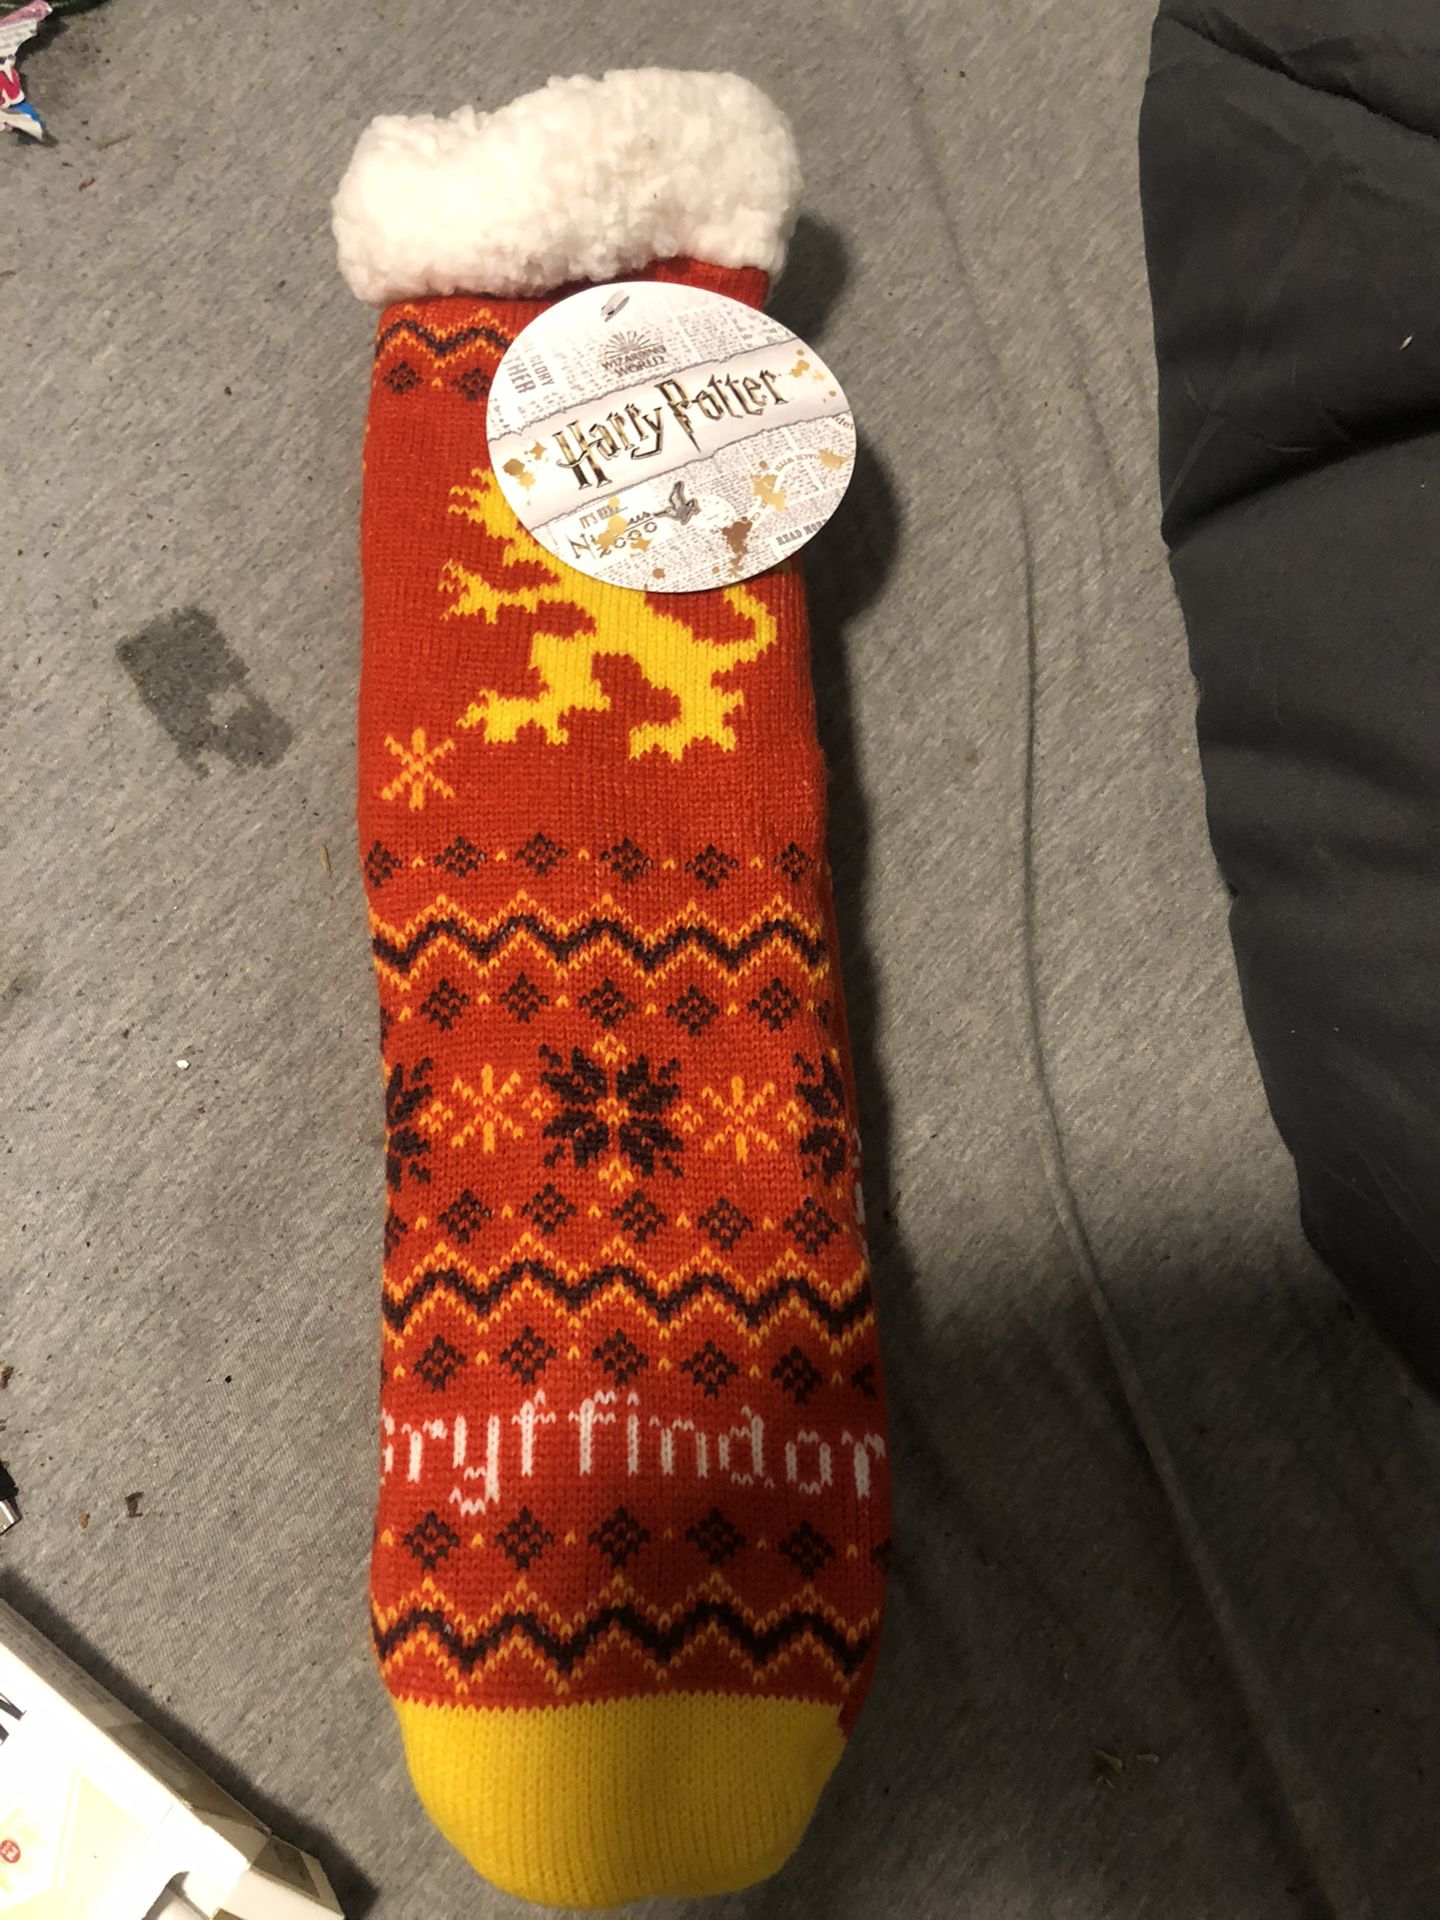 Harry Potter one size fits ok gryffondor house with the logo at the bottom . With the lion in the middle never worn selling for less than half retail